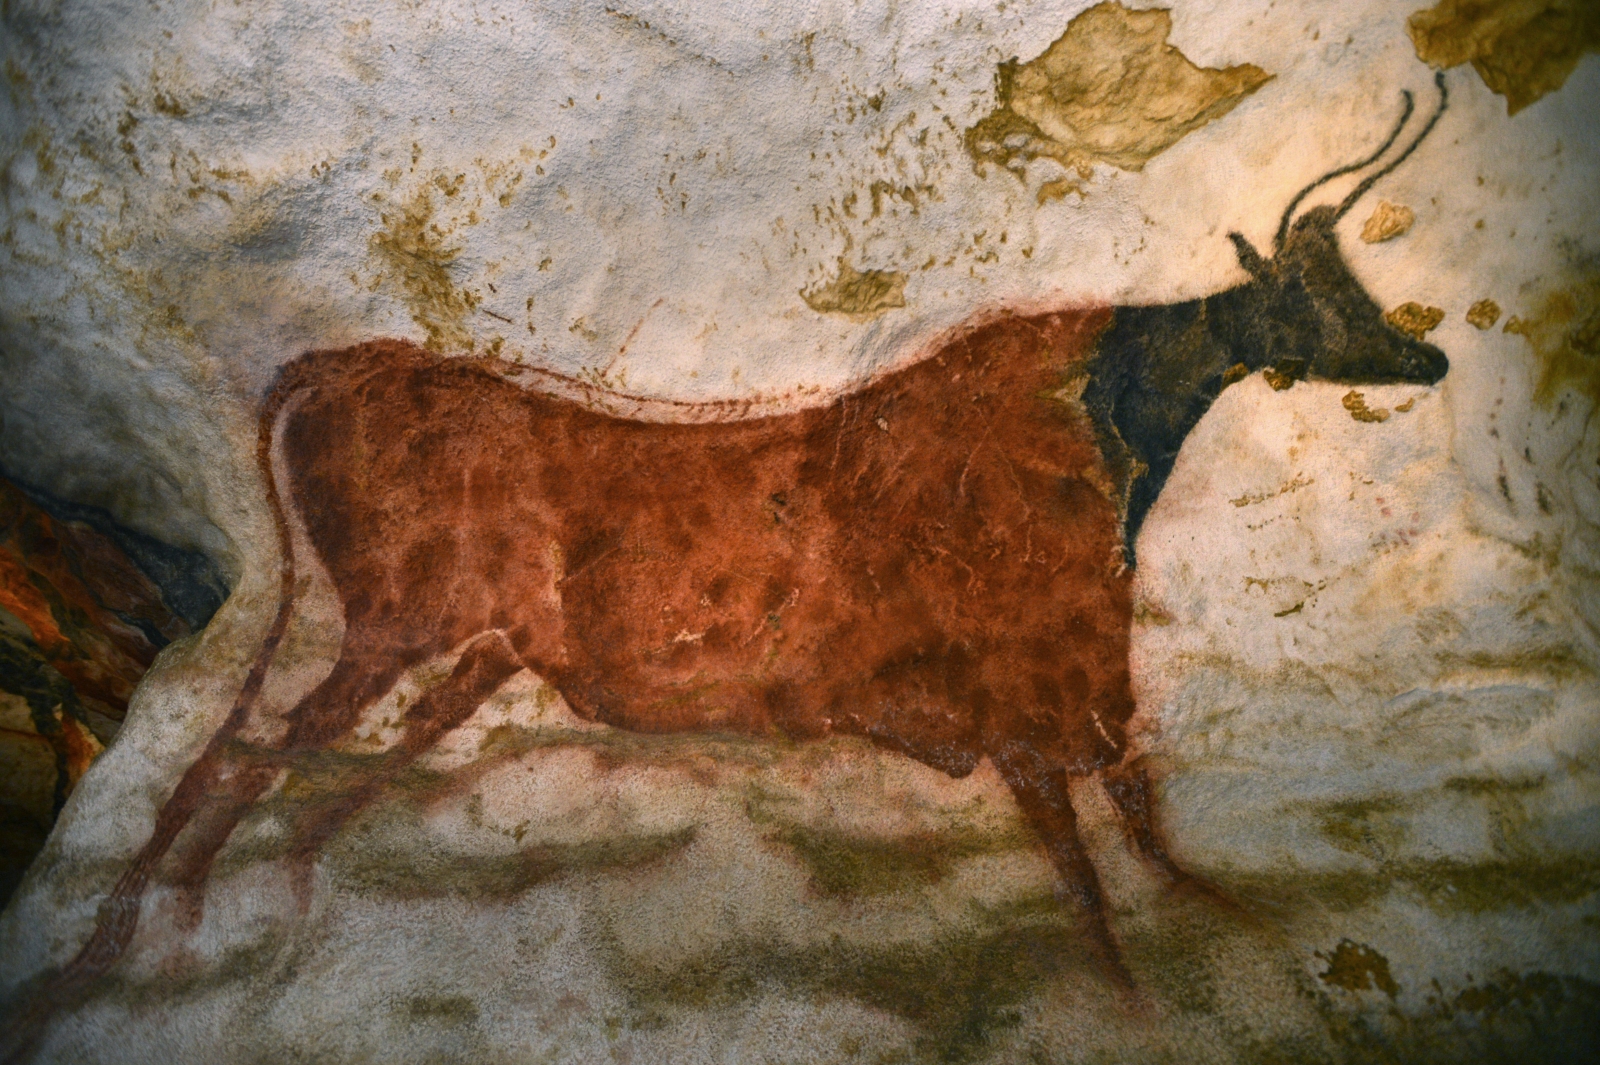 Lascaux caves New site sheds light on mysterious Palaeolithic art